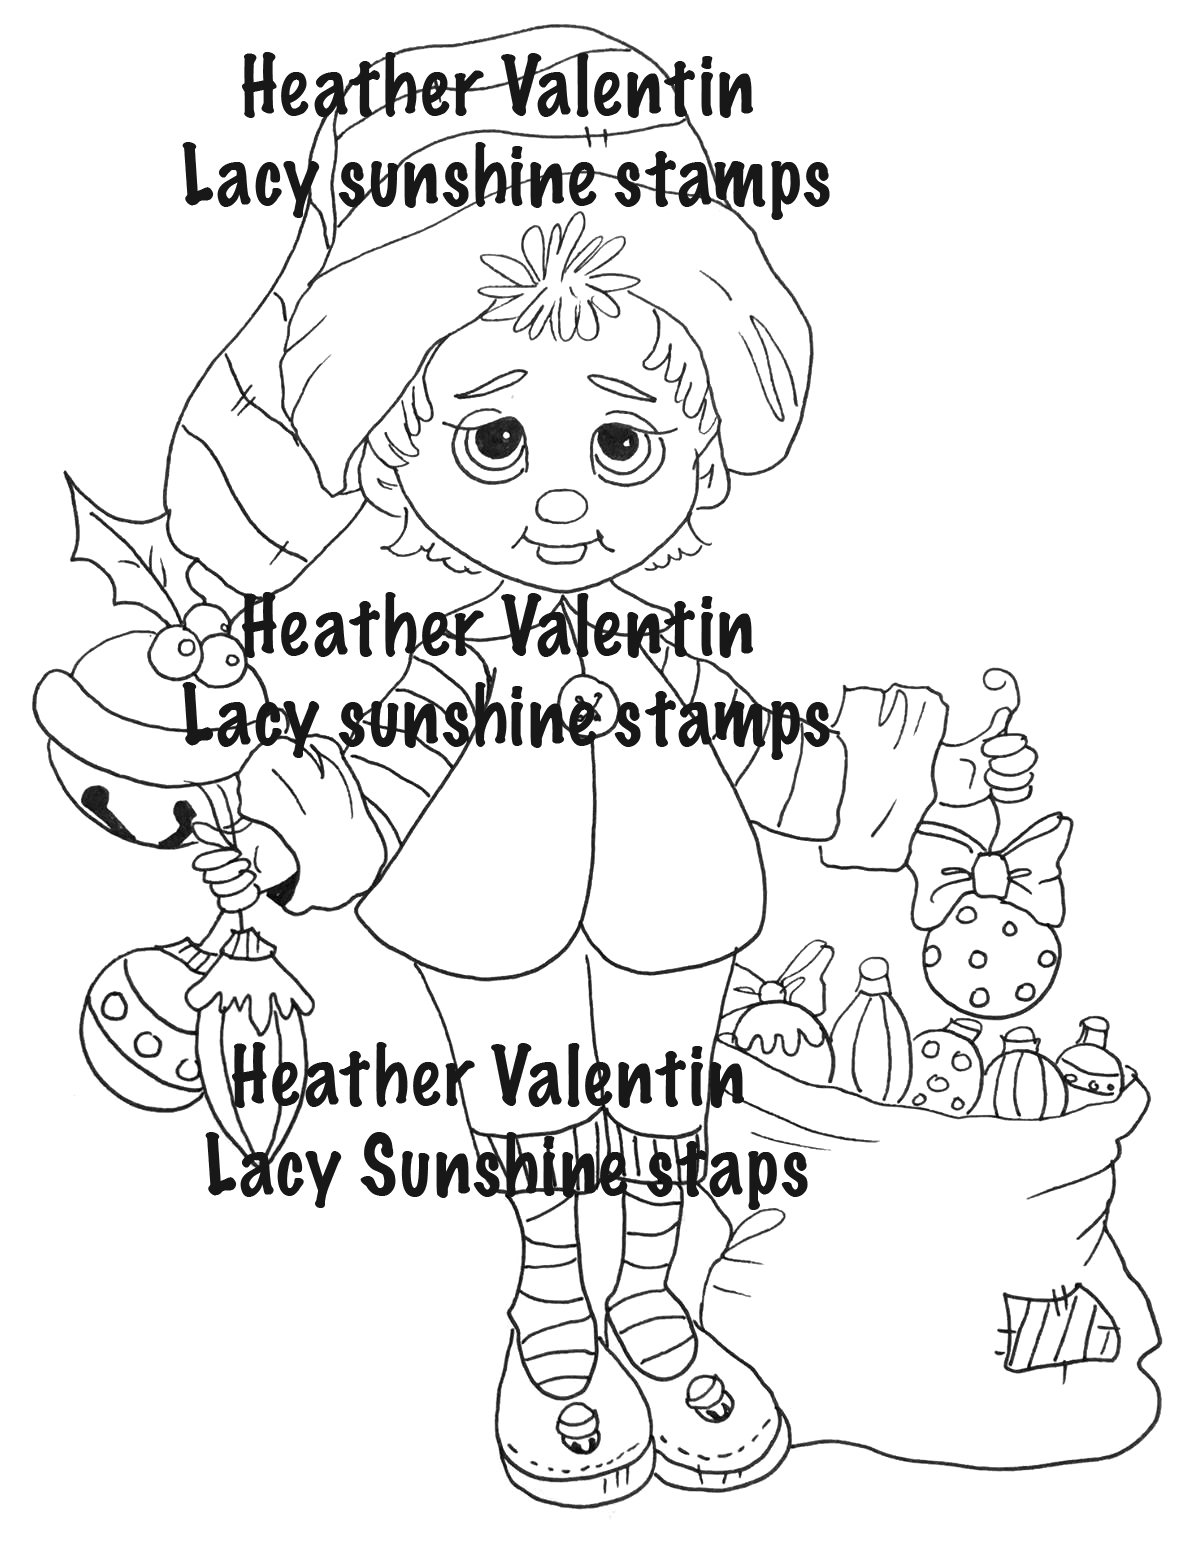 Lacy Sunshine s Color Your World Blog Jingles Stars In Rory s Walrus Coloring Page This Book Being Released As Digital Stamps And Coloring Pages